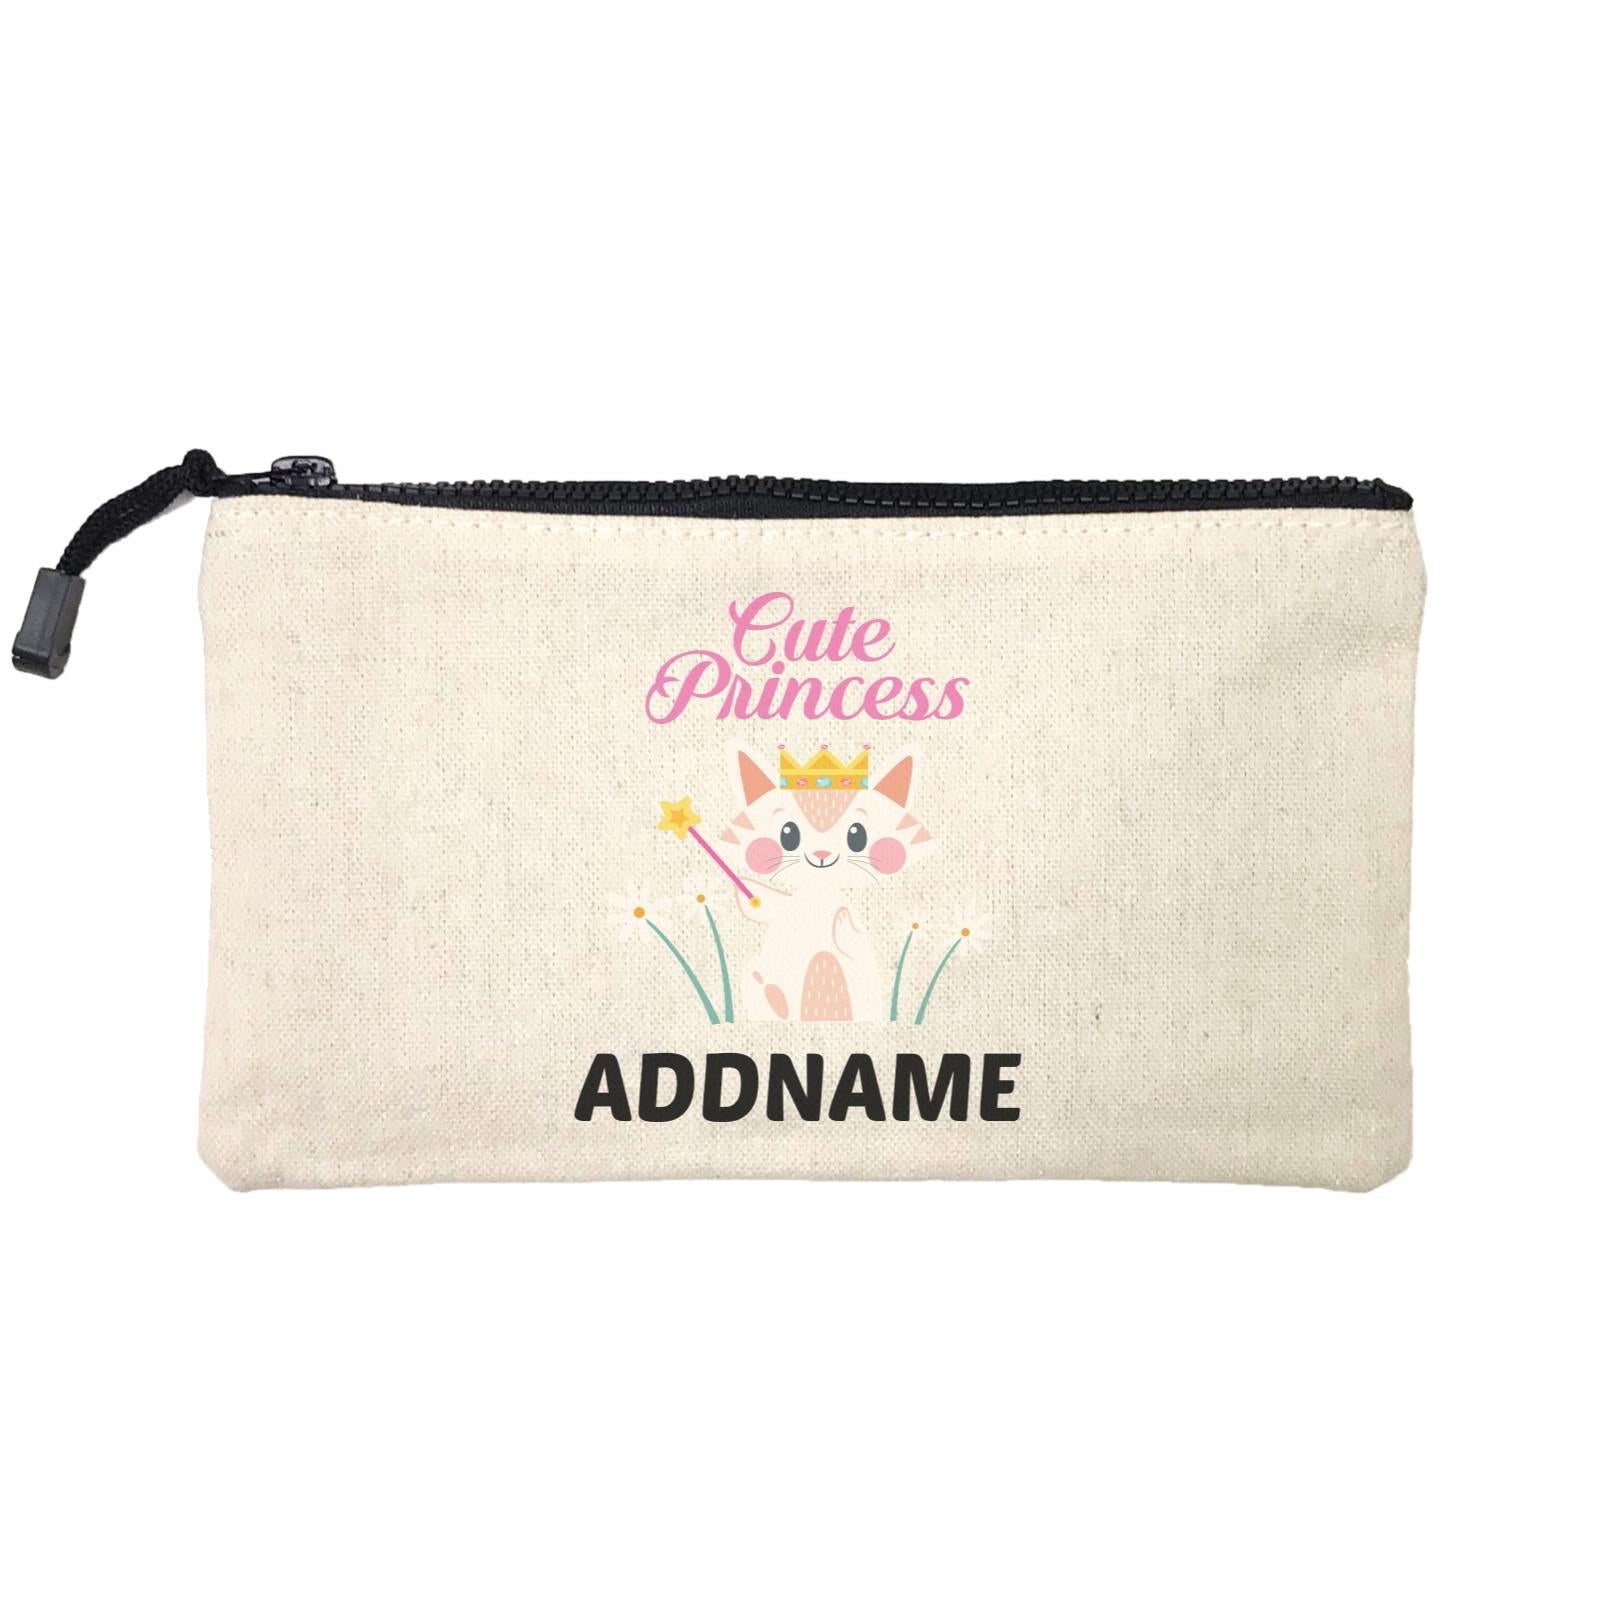 Cute Princess Addname SP Stationery Pouch